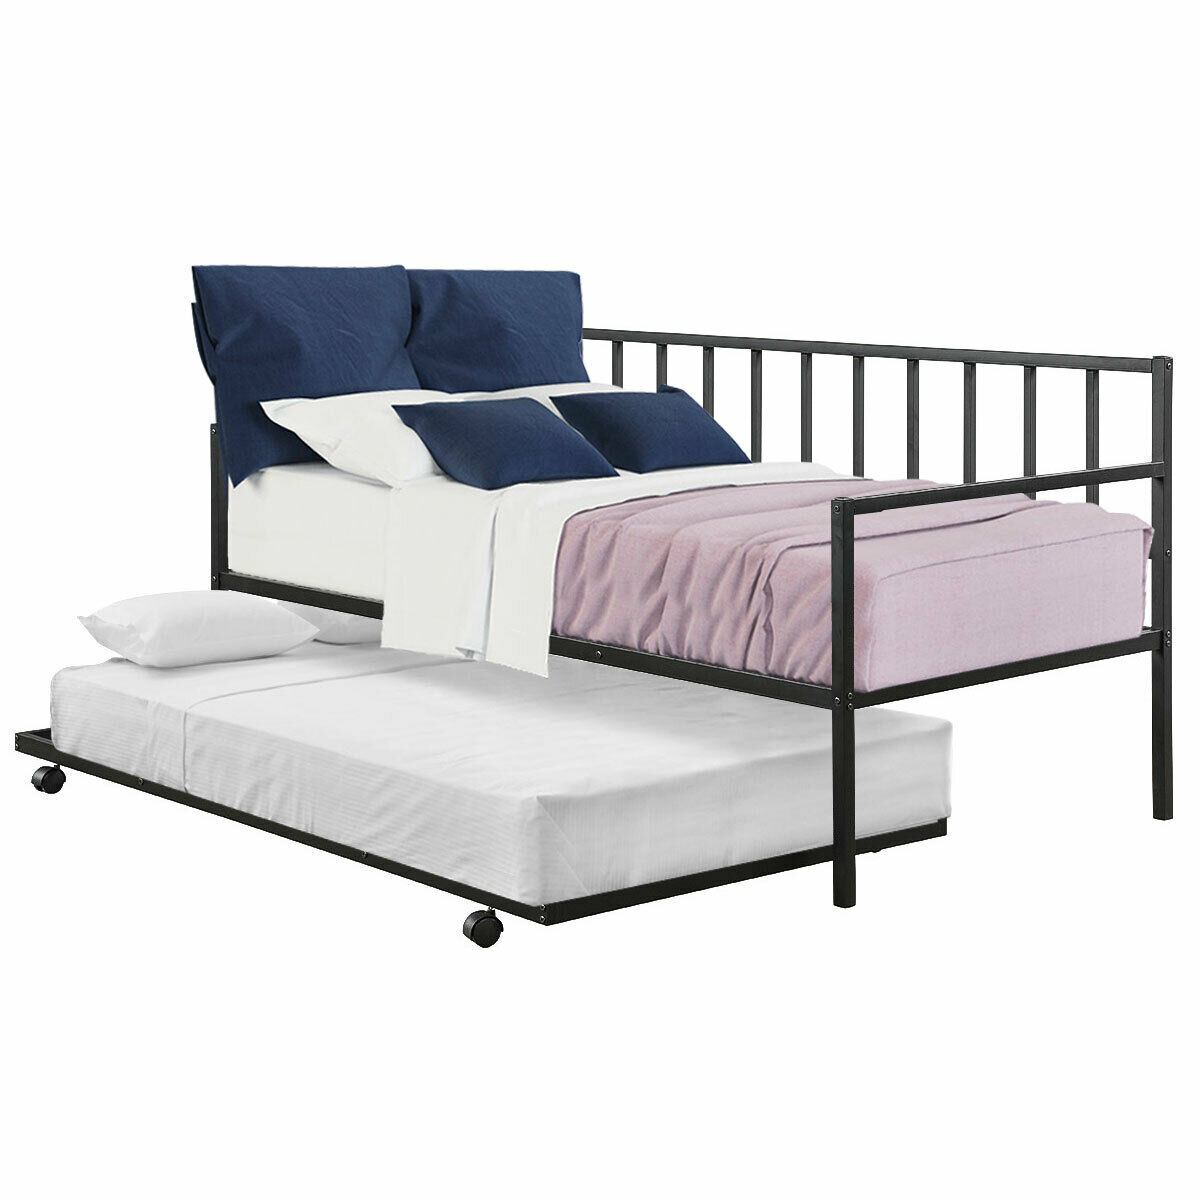 Gymax Twin Trundle Daybed W 4 Casters, Twin Mattress For Platform Bed